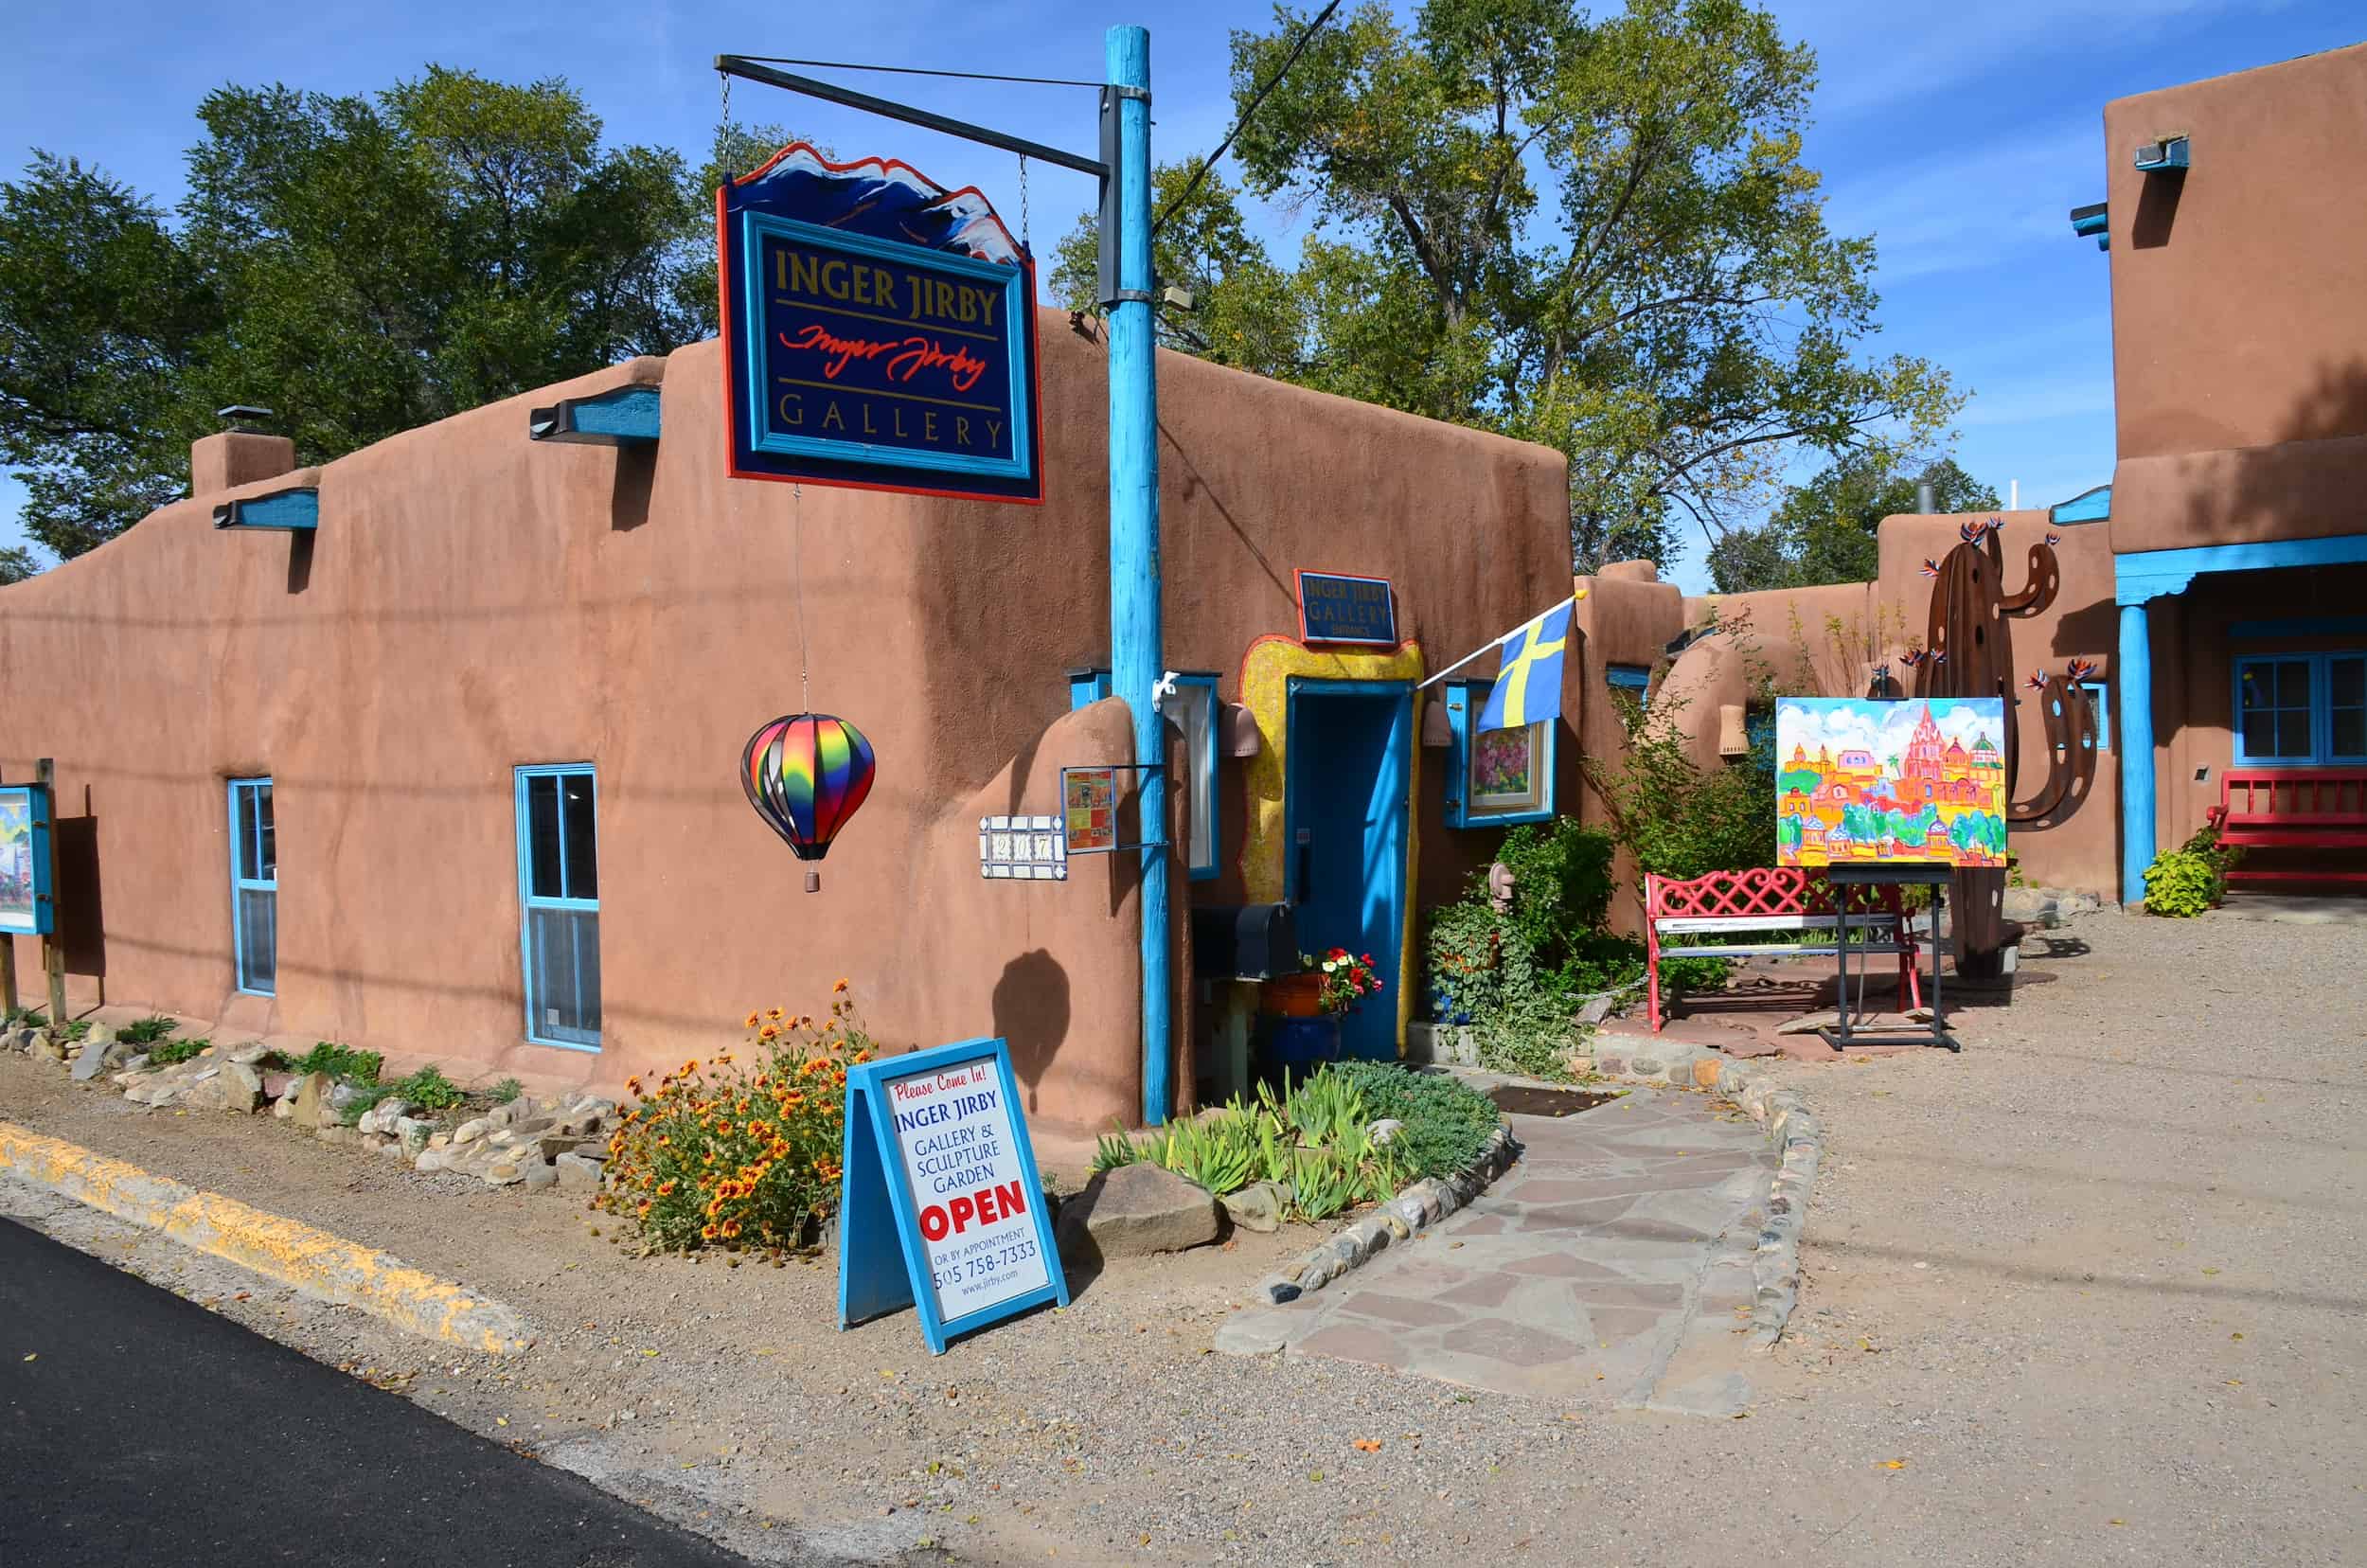 Inger Jirby Gallery in the Downtown Taos Historic District of Taos, New Mexico